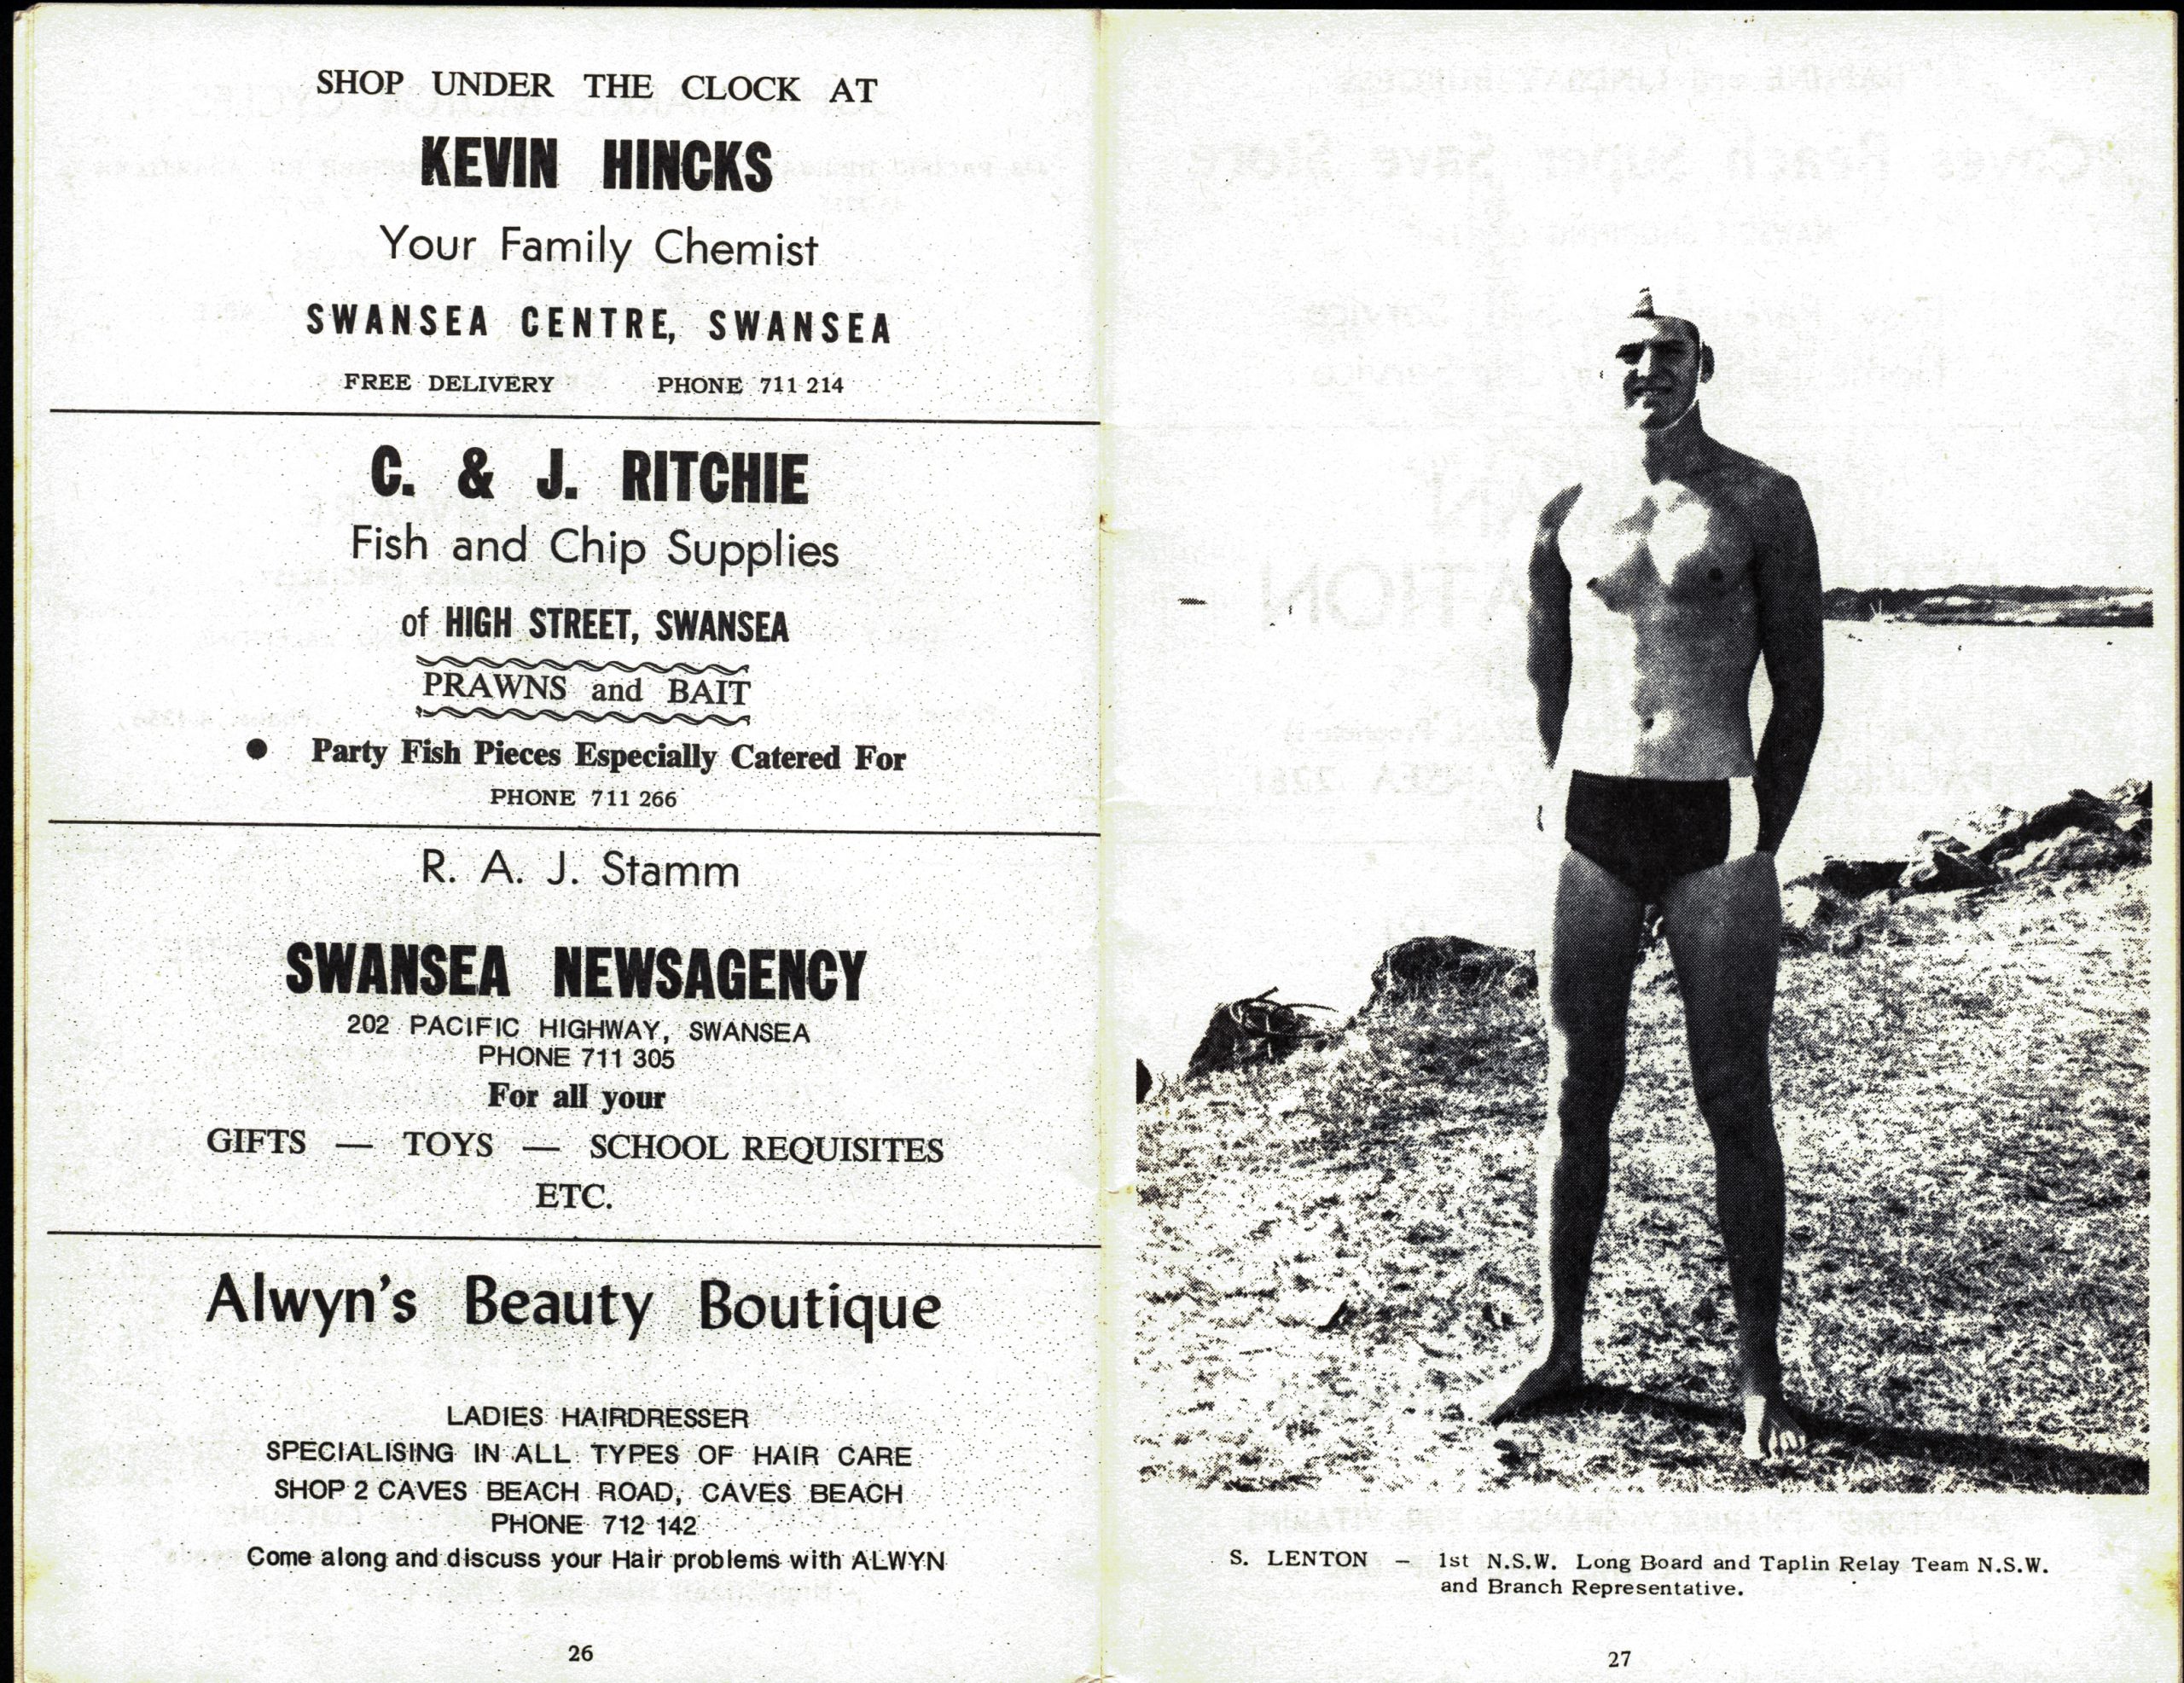 Programme pages with advertisements followed by a black and white photograph of a life saver in swimmers named S. Lenton.